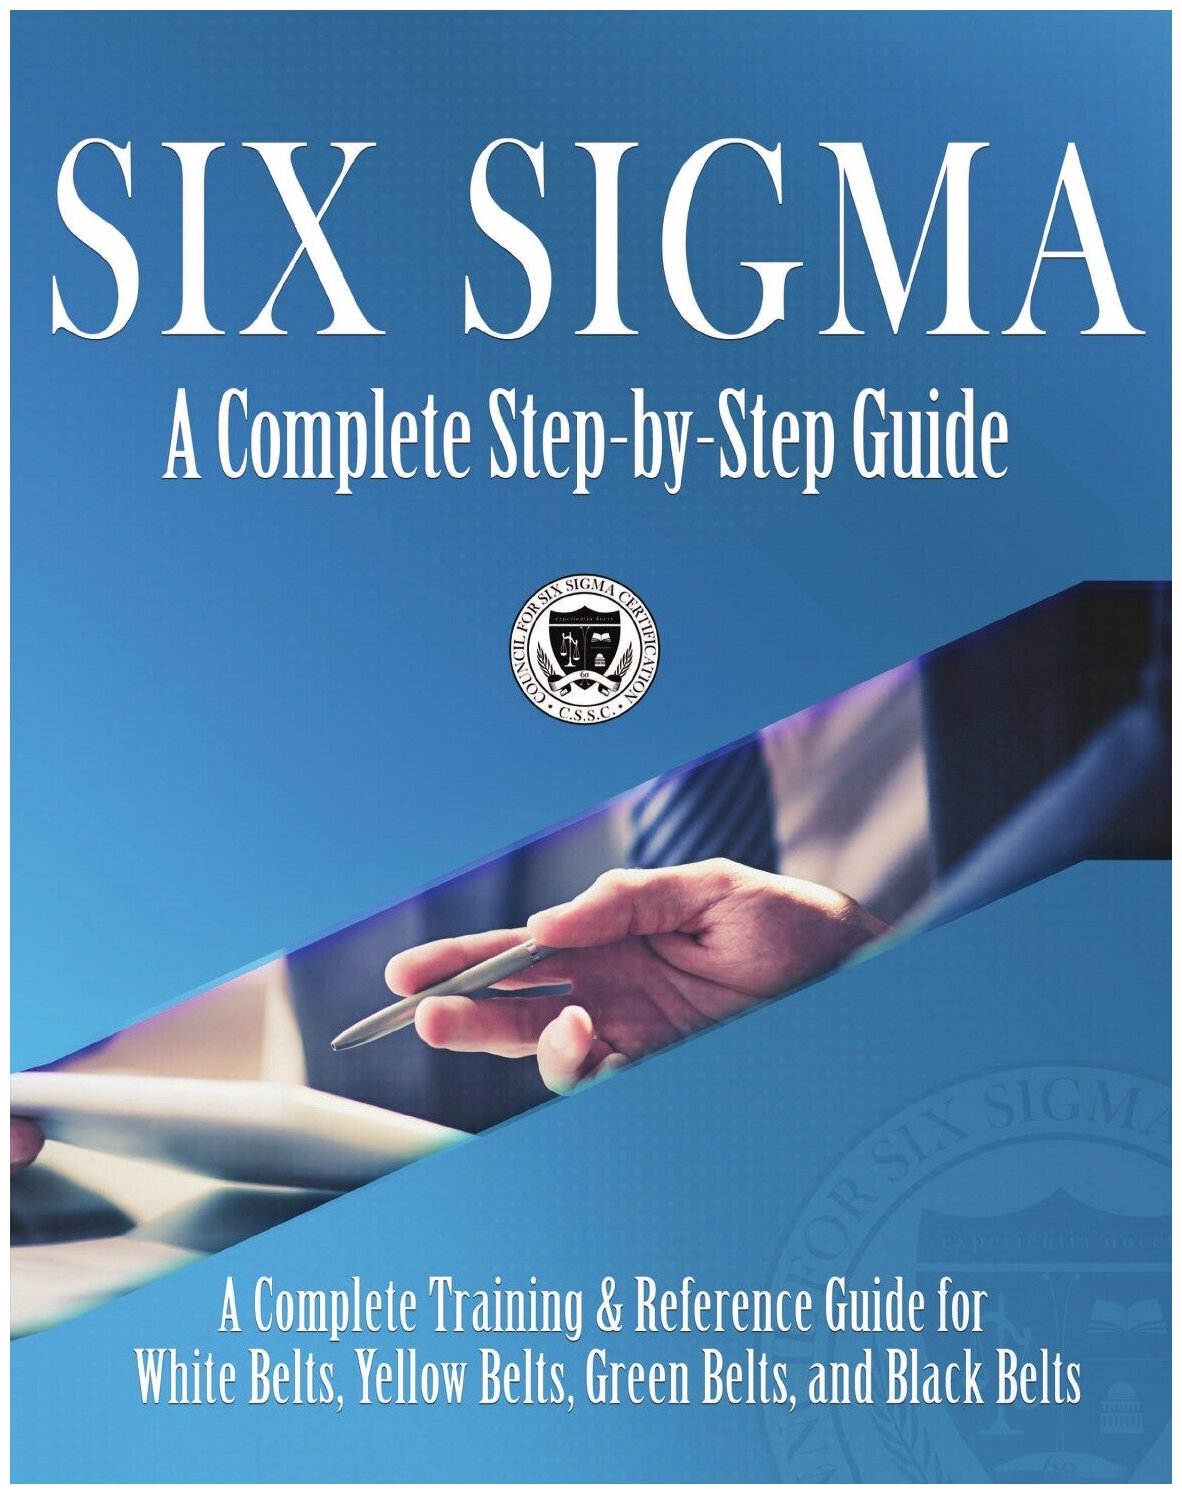 Six Sigma. A Complete Step-by-Step Guide: A Complete Training & Reference Guide for White Belts, Yellow Belts, Green Belts, and Black Belts